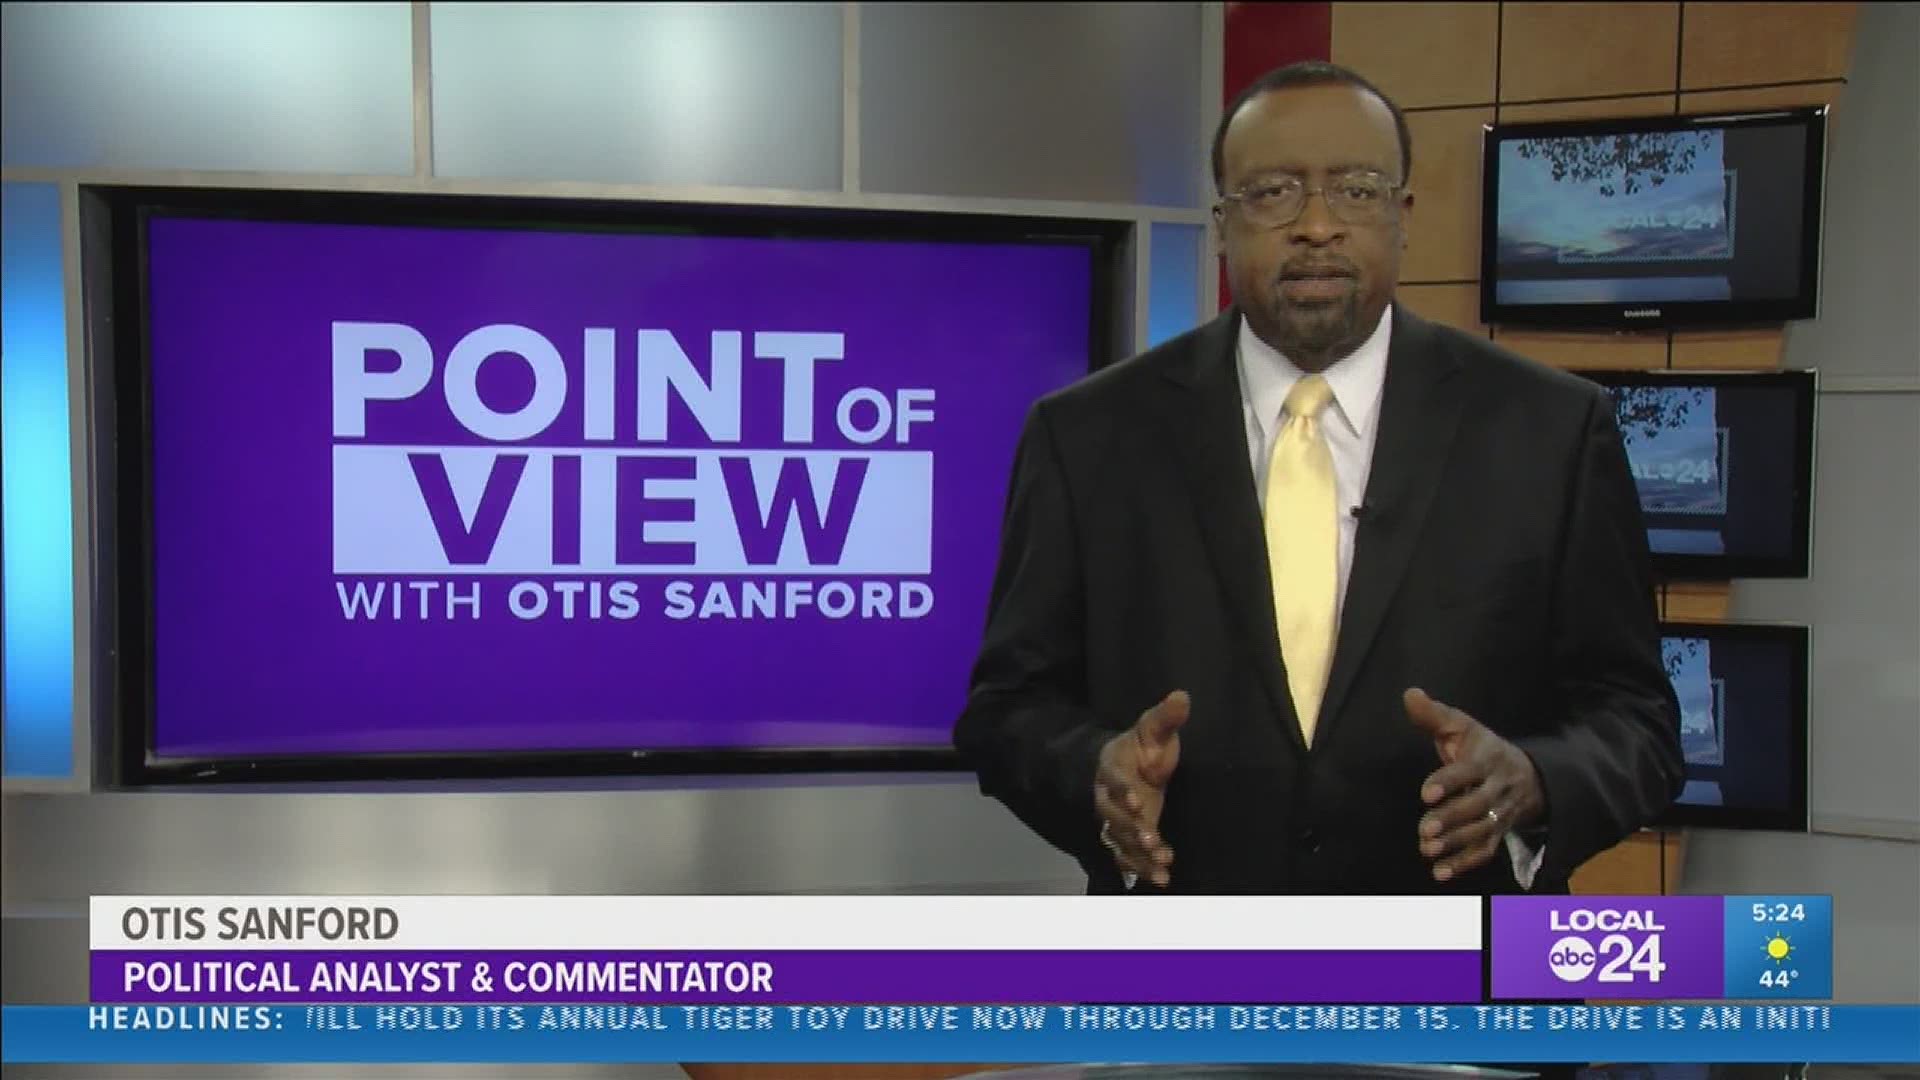 Local 24 News political analyst and commentator Otis Sanford shares his point of view on FedEx’s involvement with COVID-19 vaccine distribution.